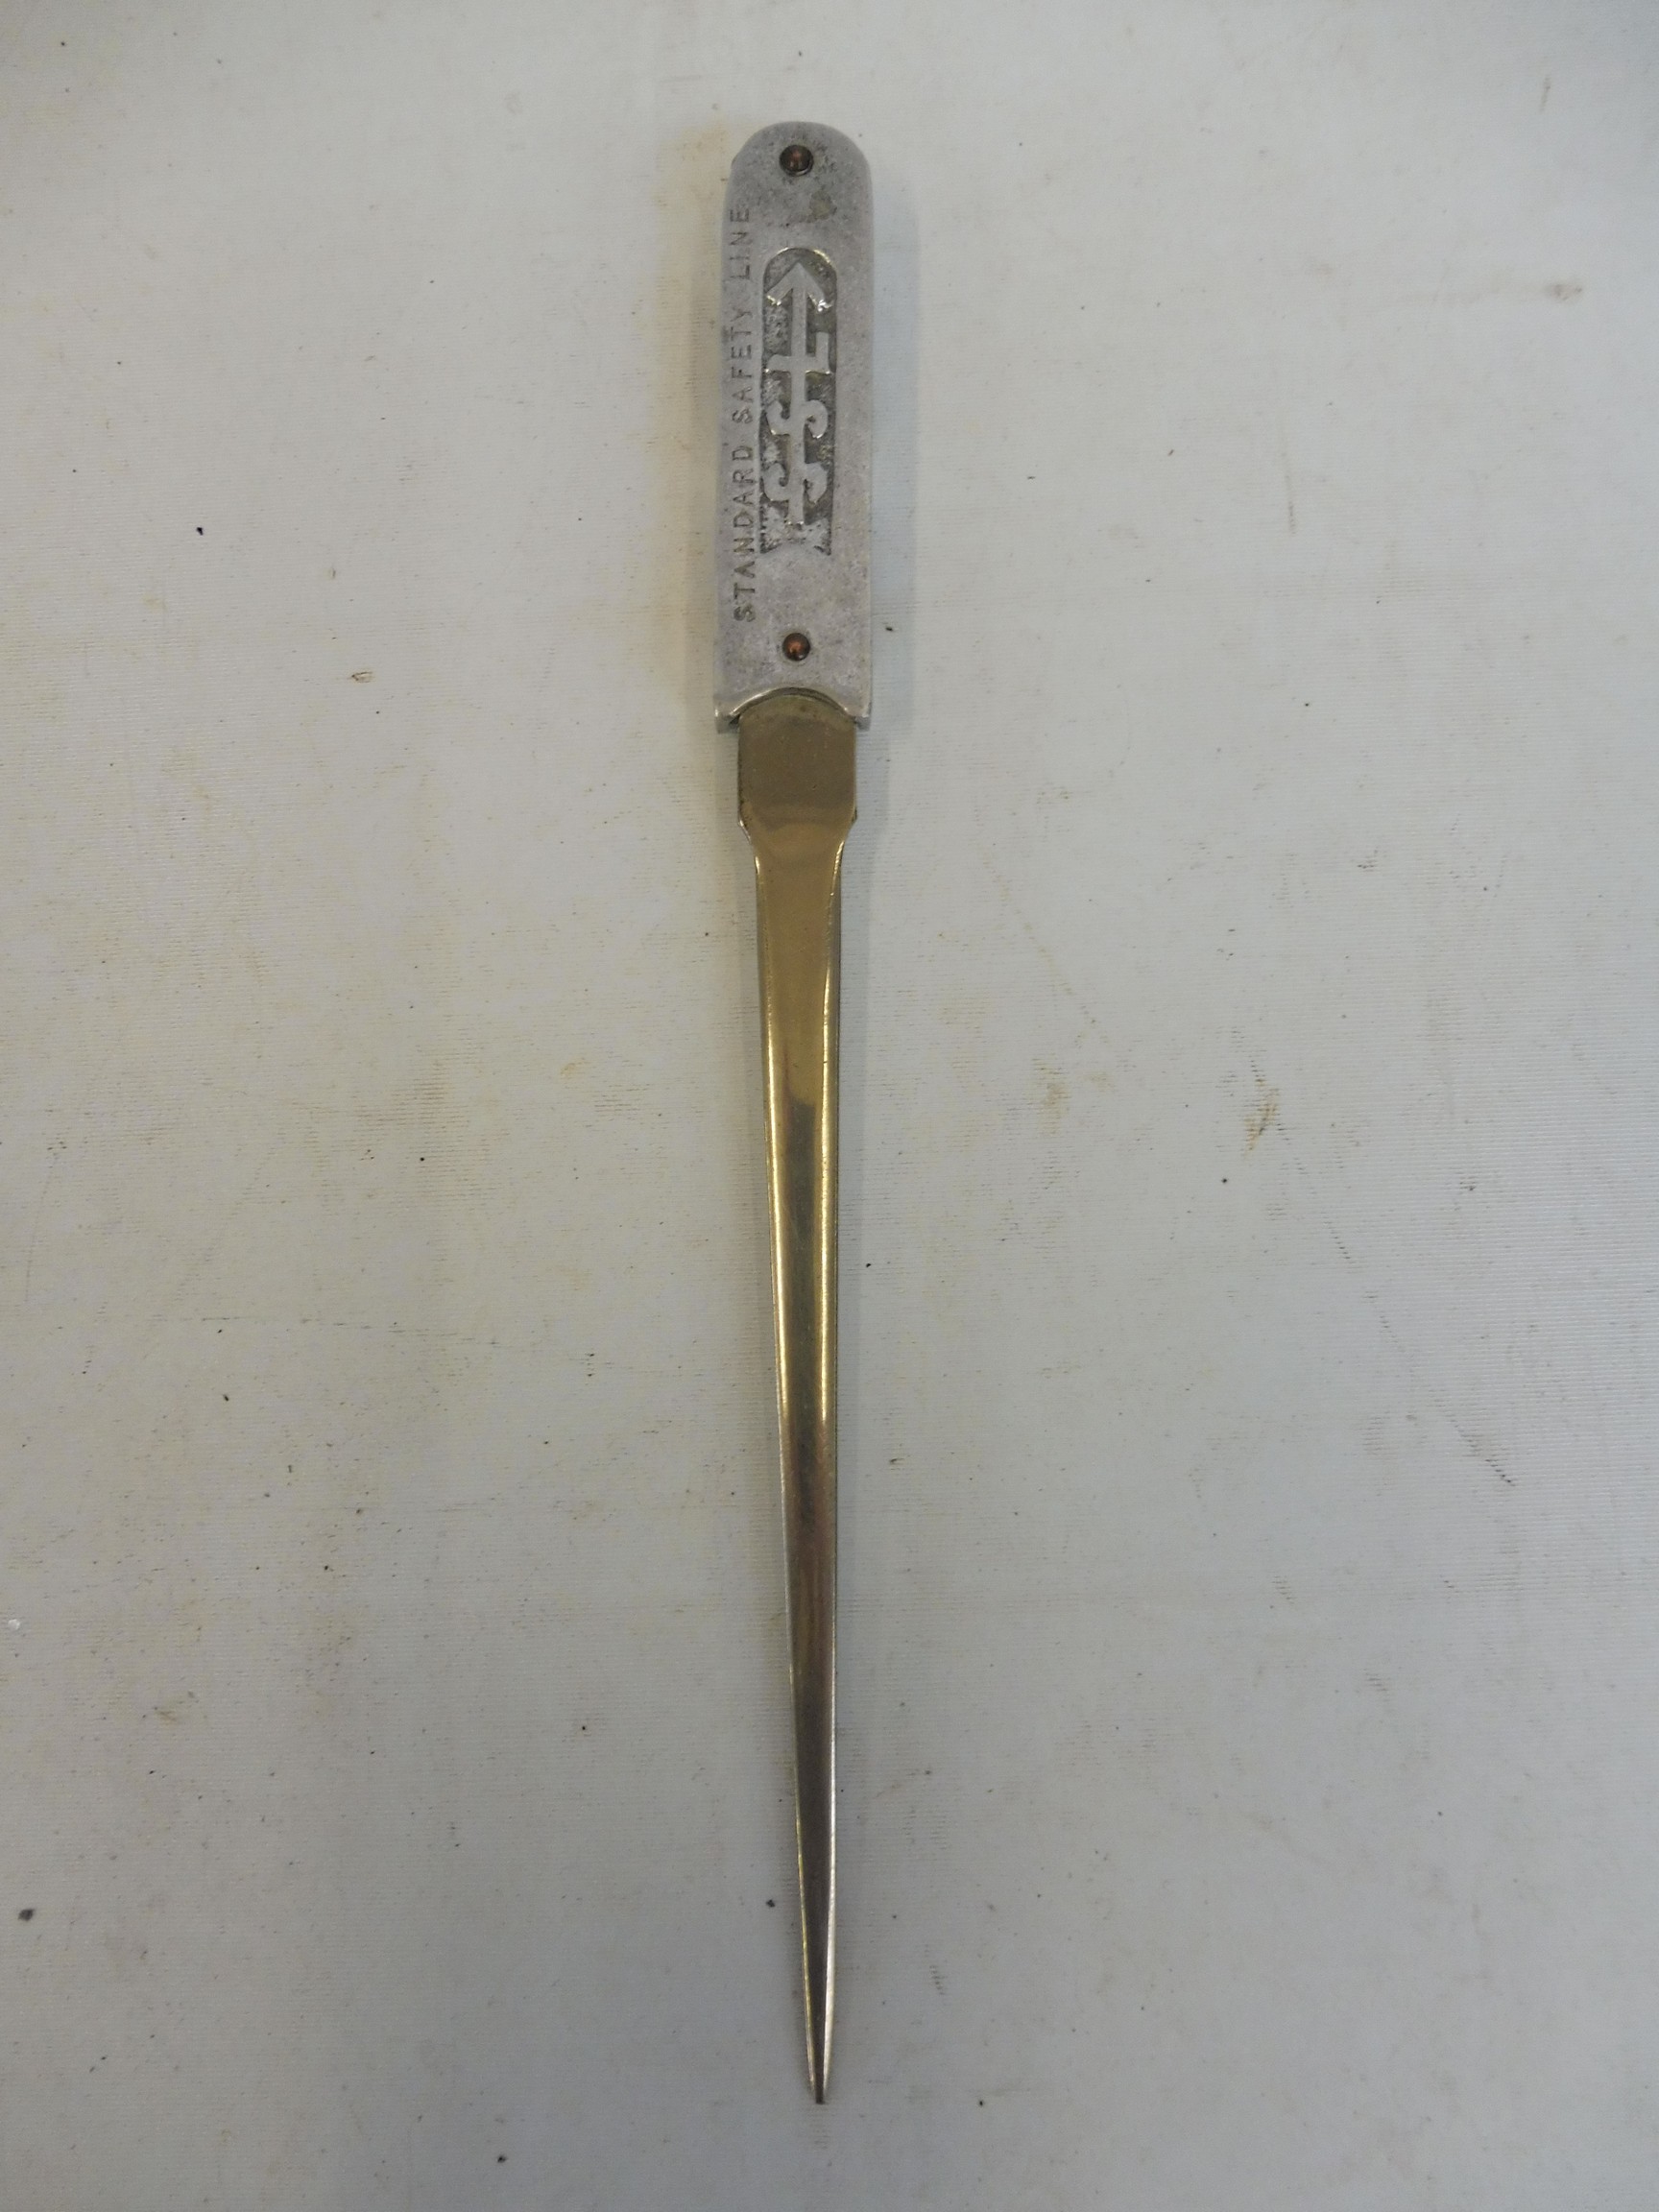 An Anglo American Oil Co. Ltd. letter opener dated 1925.